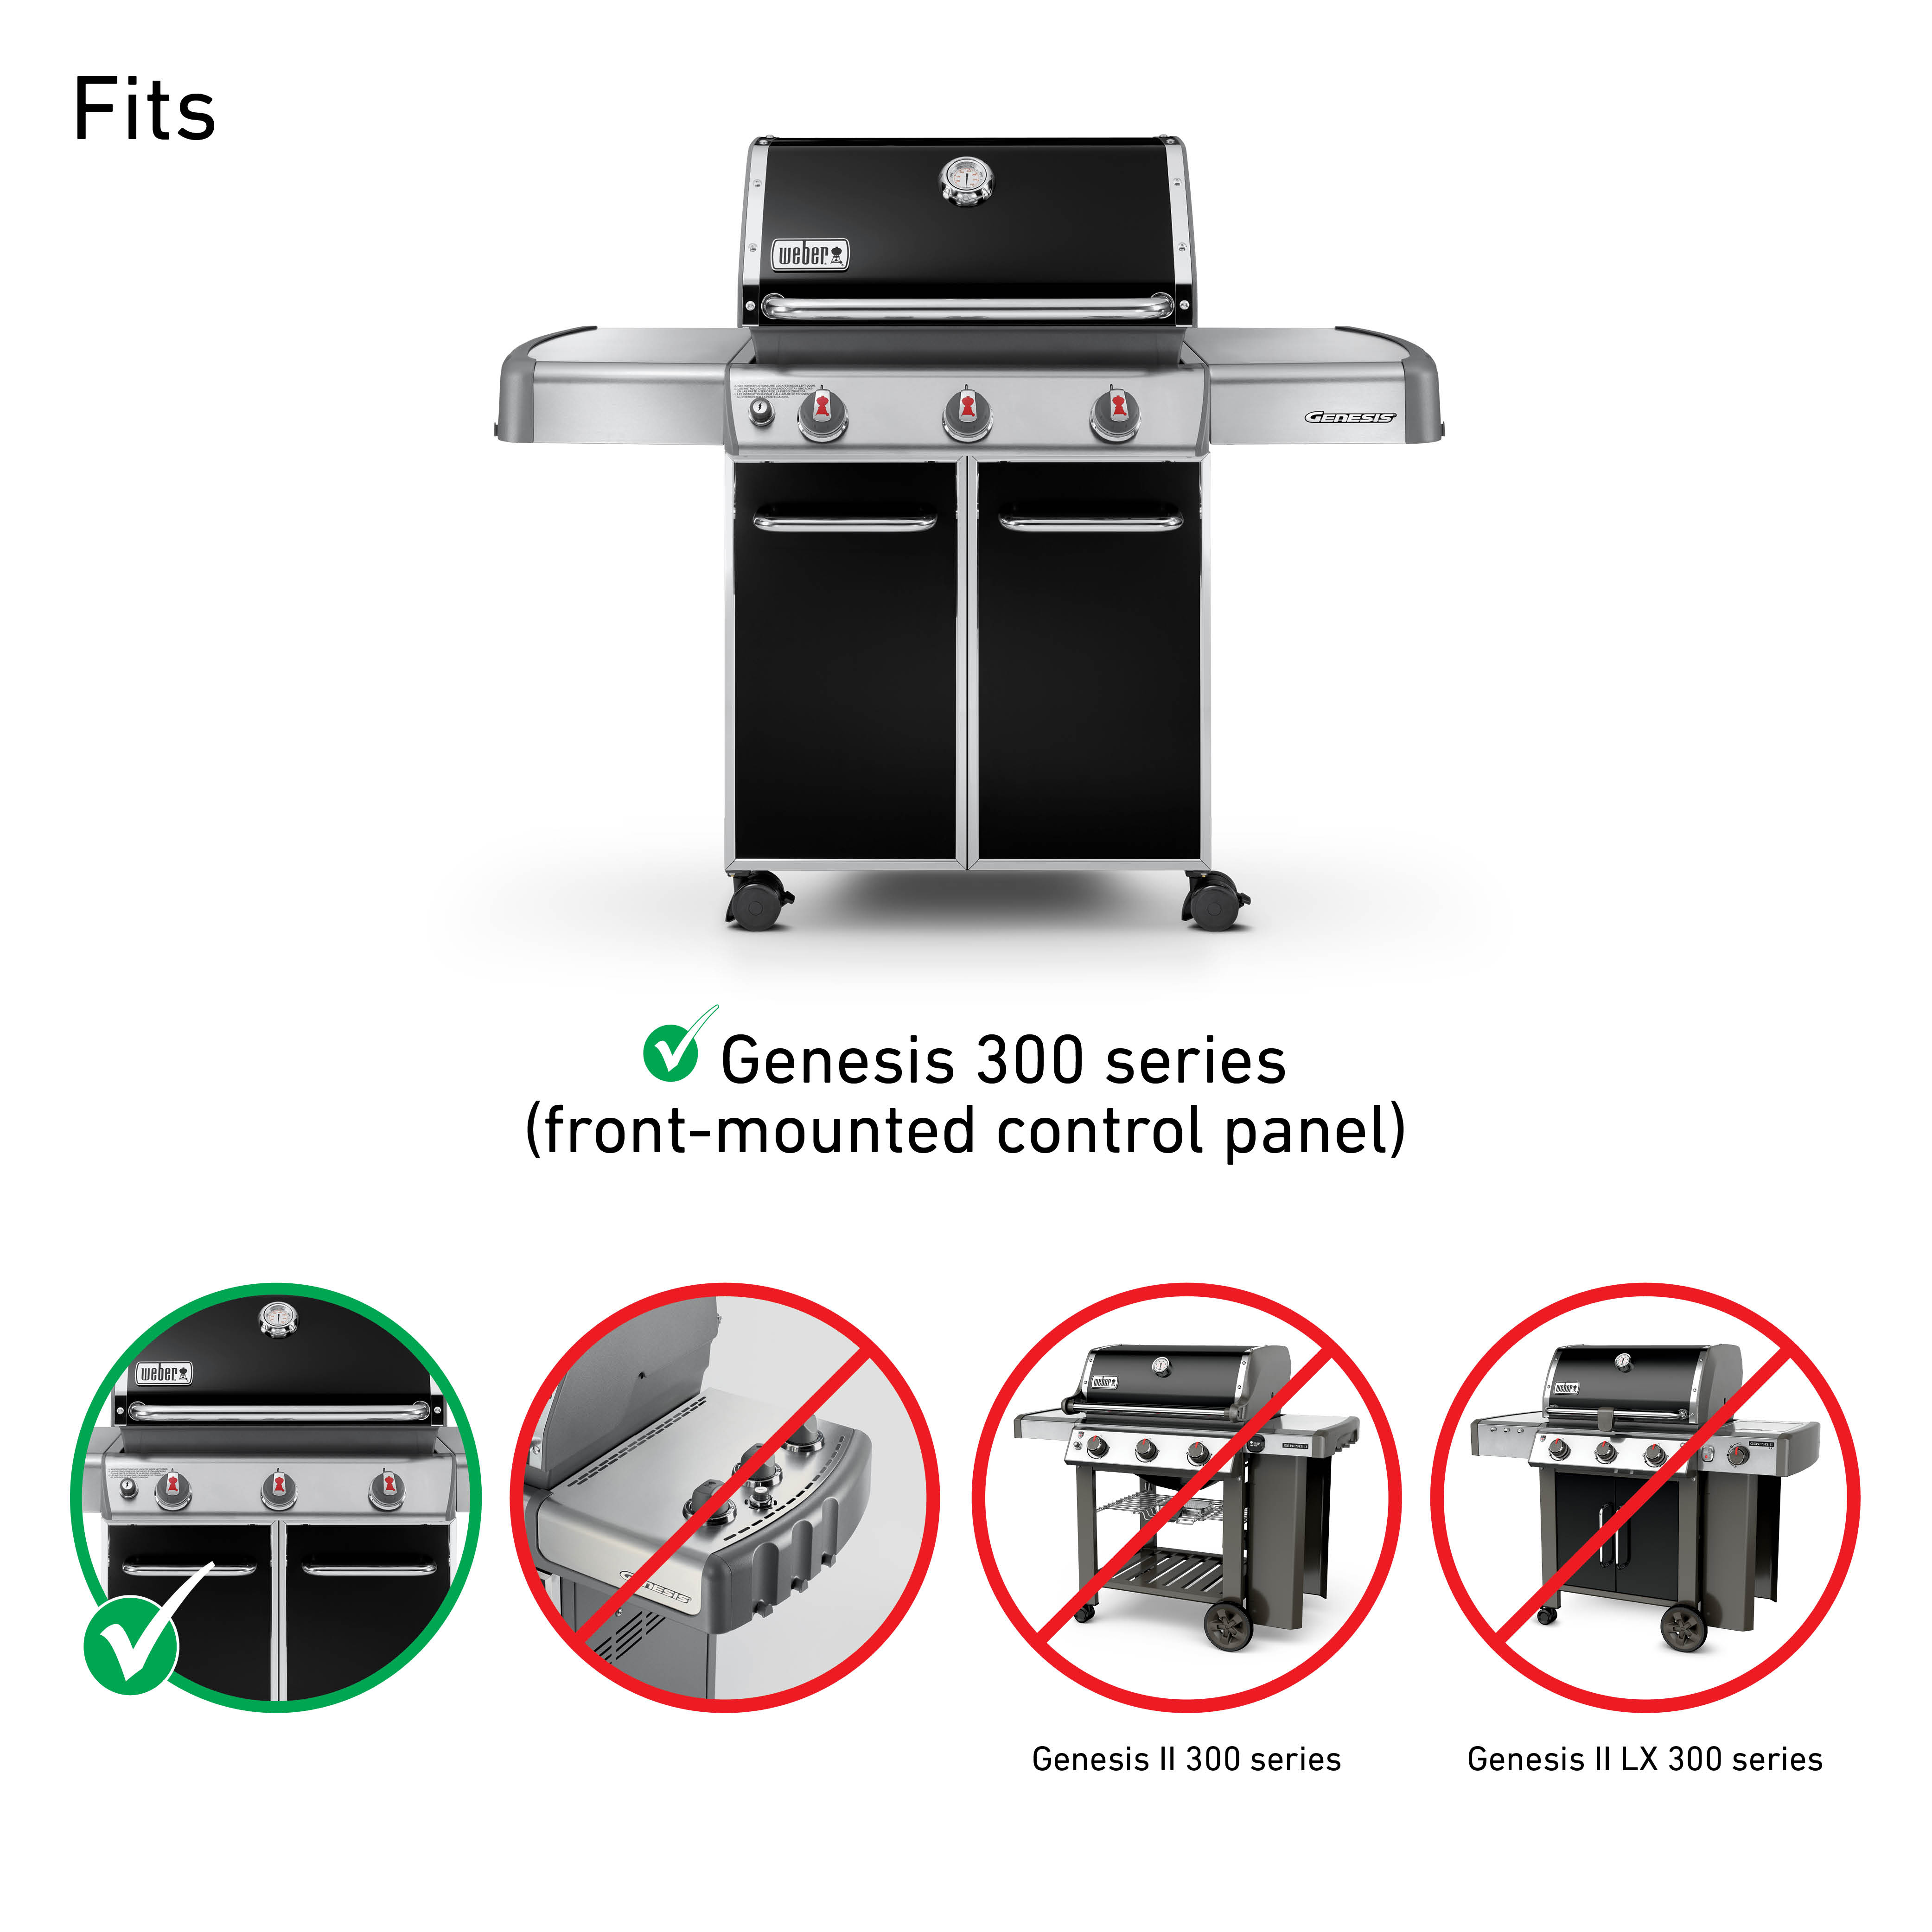 Weber Stainless Steel Flavorizer Bars, Genesis 300 Series with Front-mounted knobs - image 2 of 4